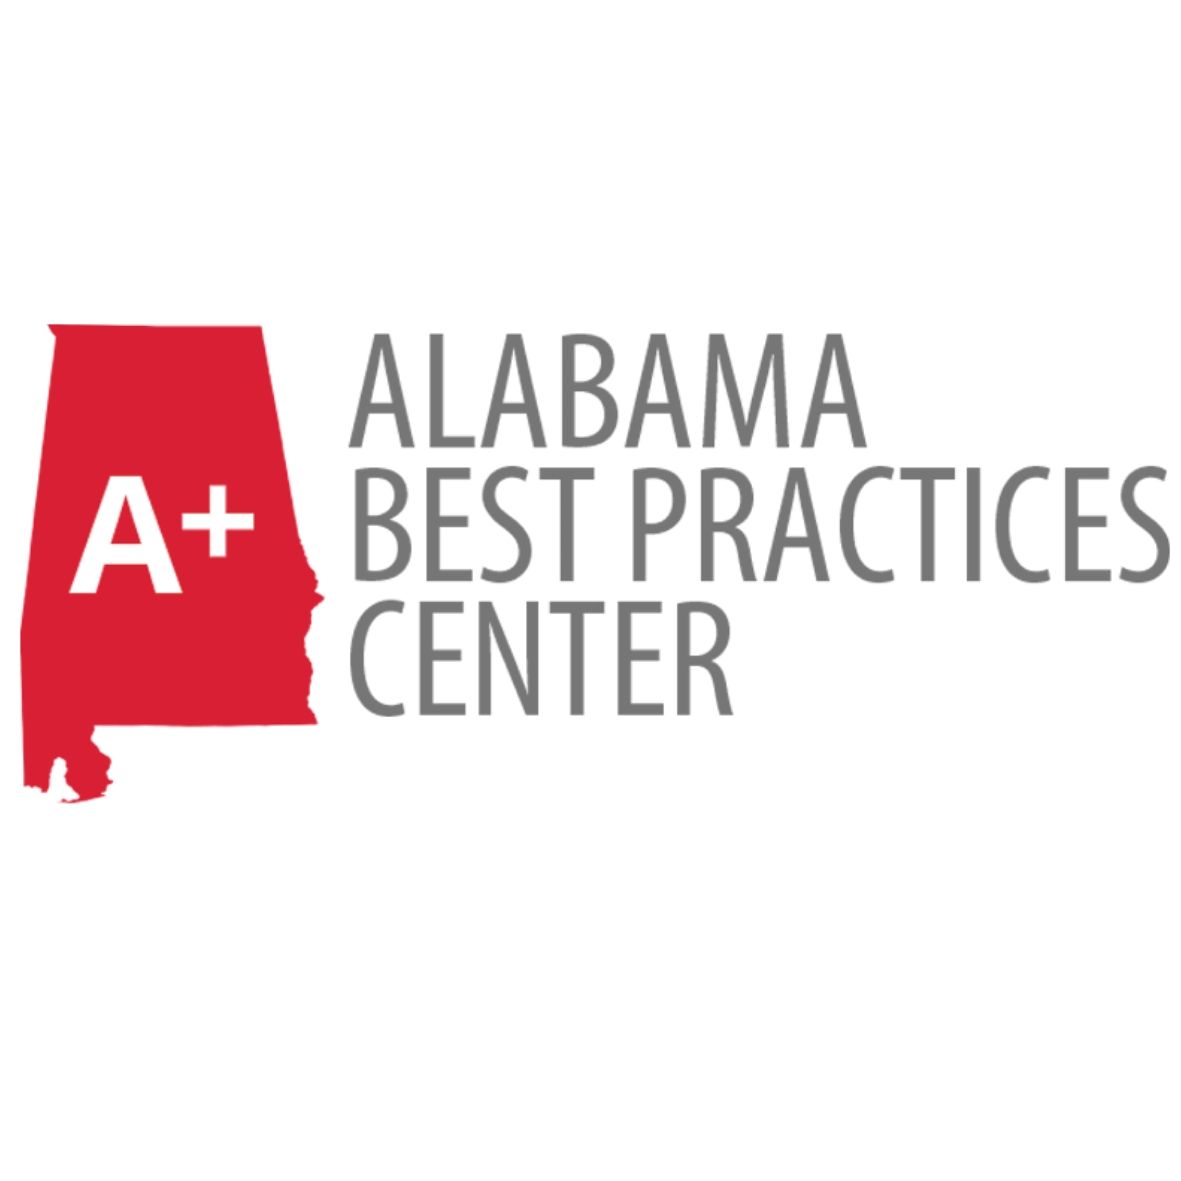 Resources from our Alabama Best Practices Center in all subject areas